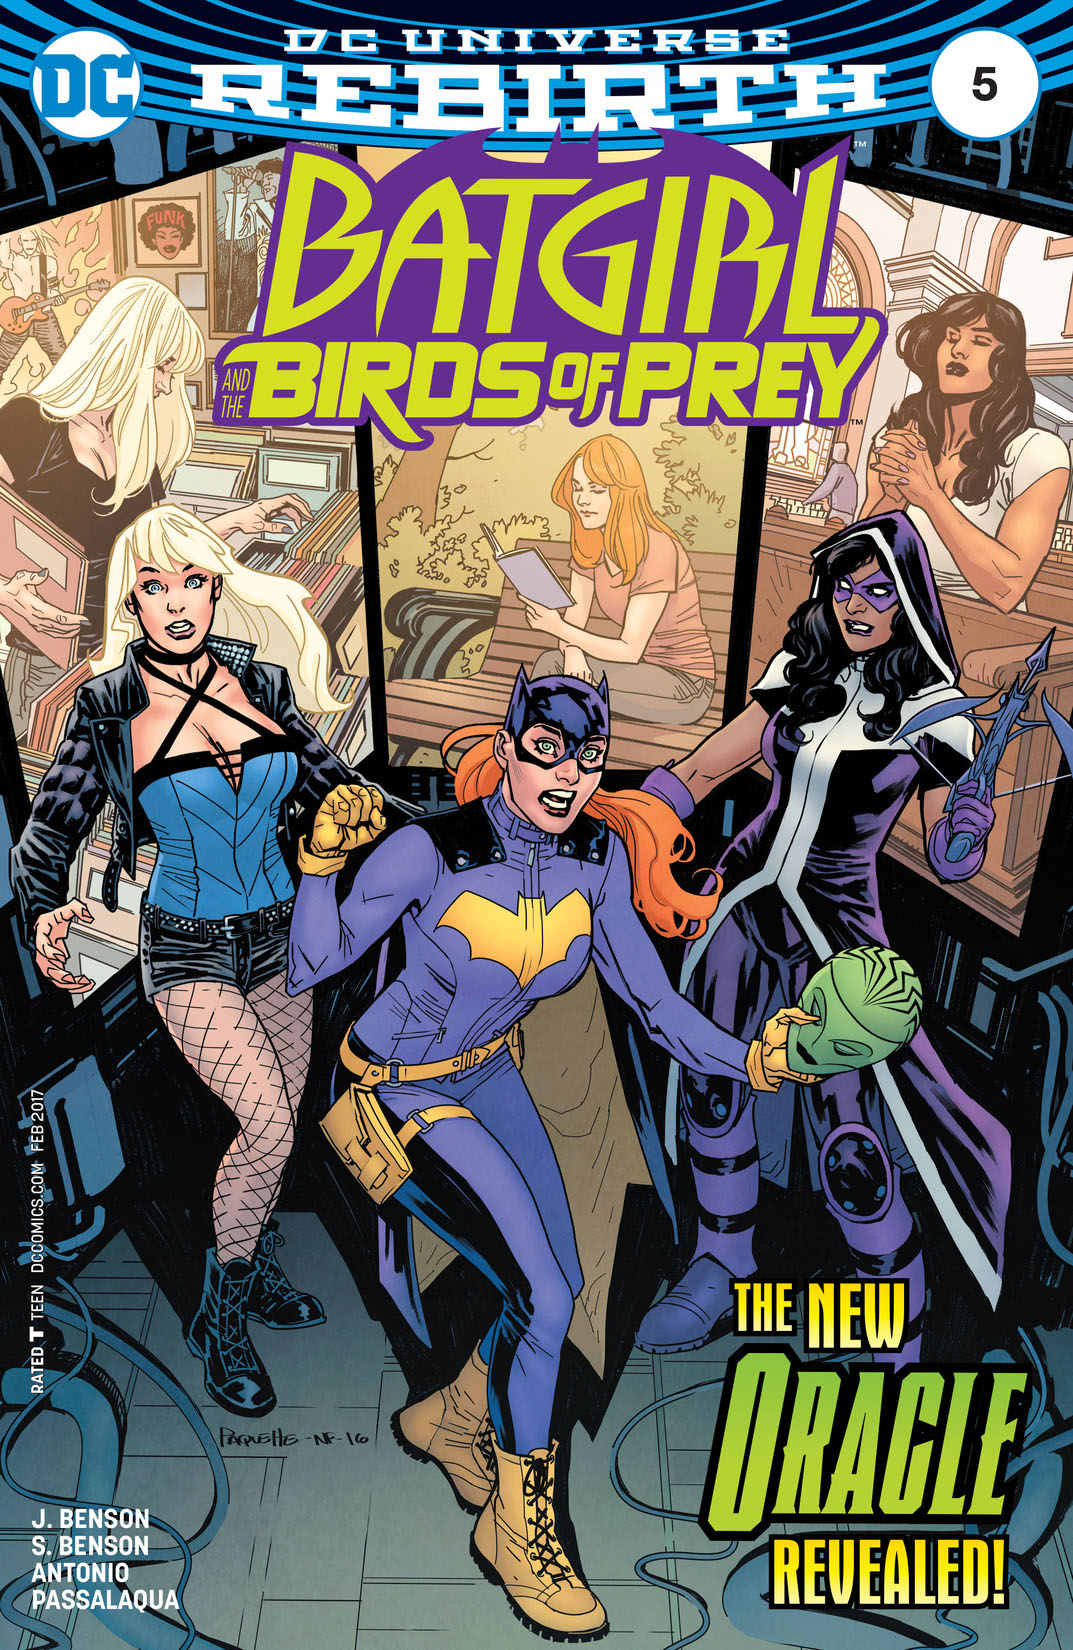 Batgirl and the Birds of Prey #5 preview images